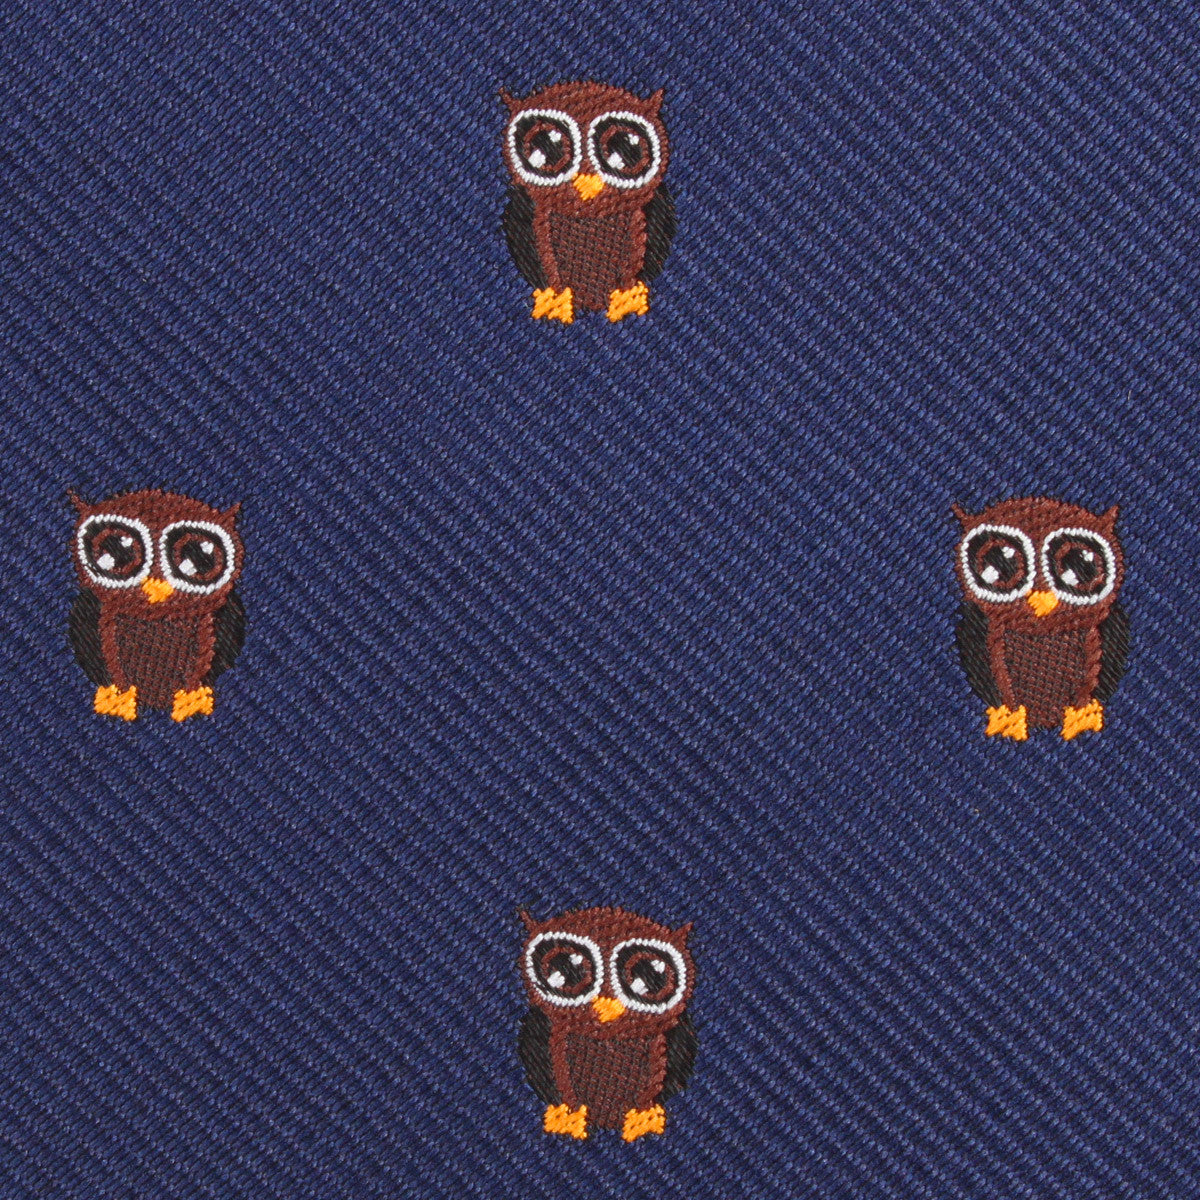 Brown Horned Owl Fabric Pocket Square